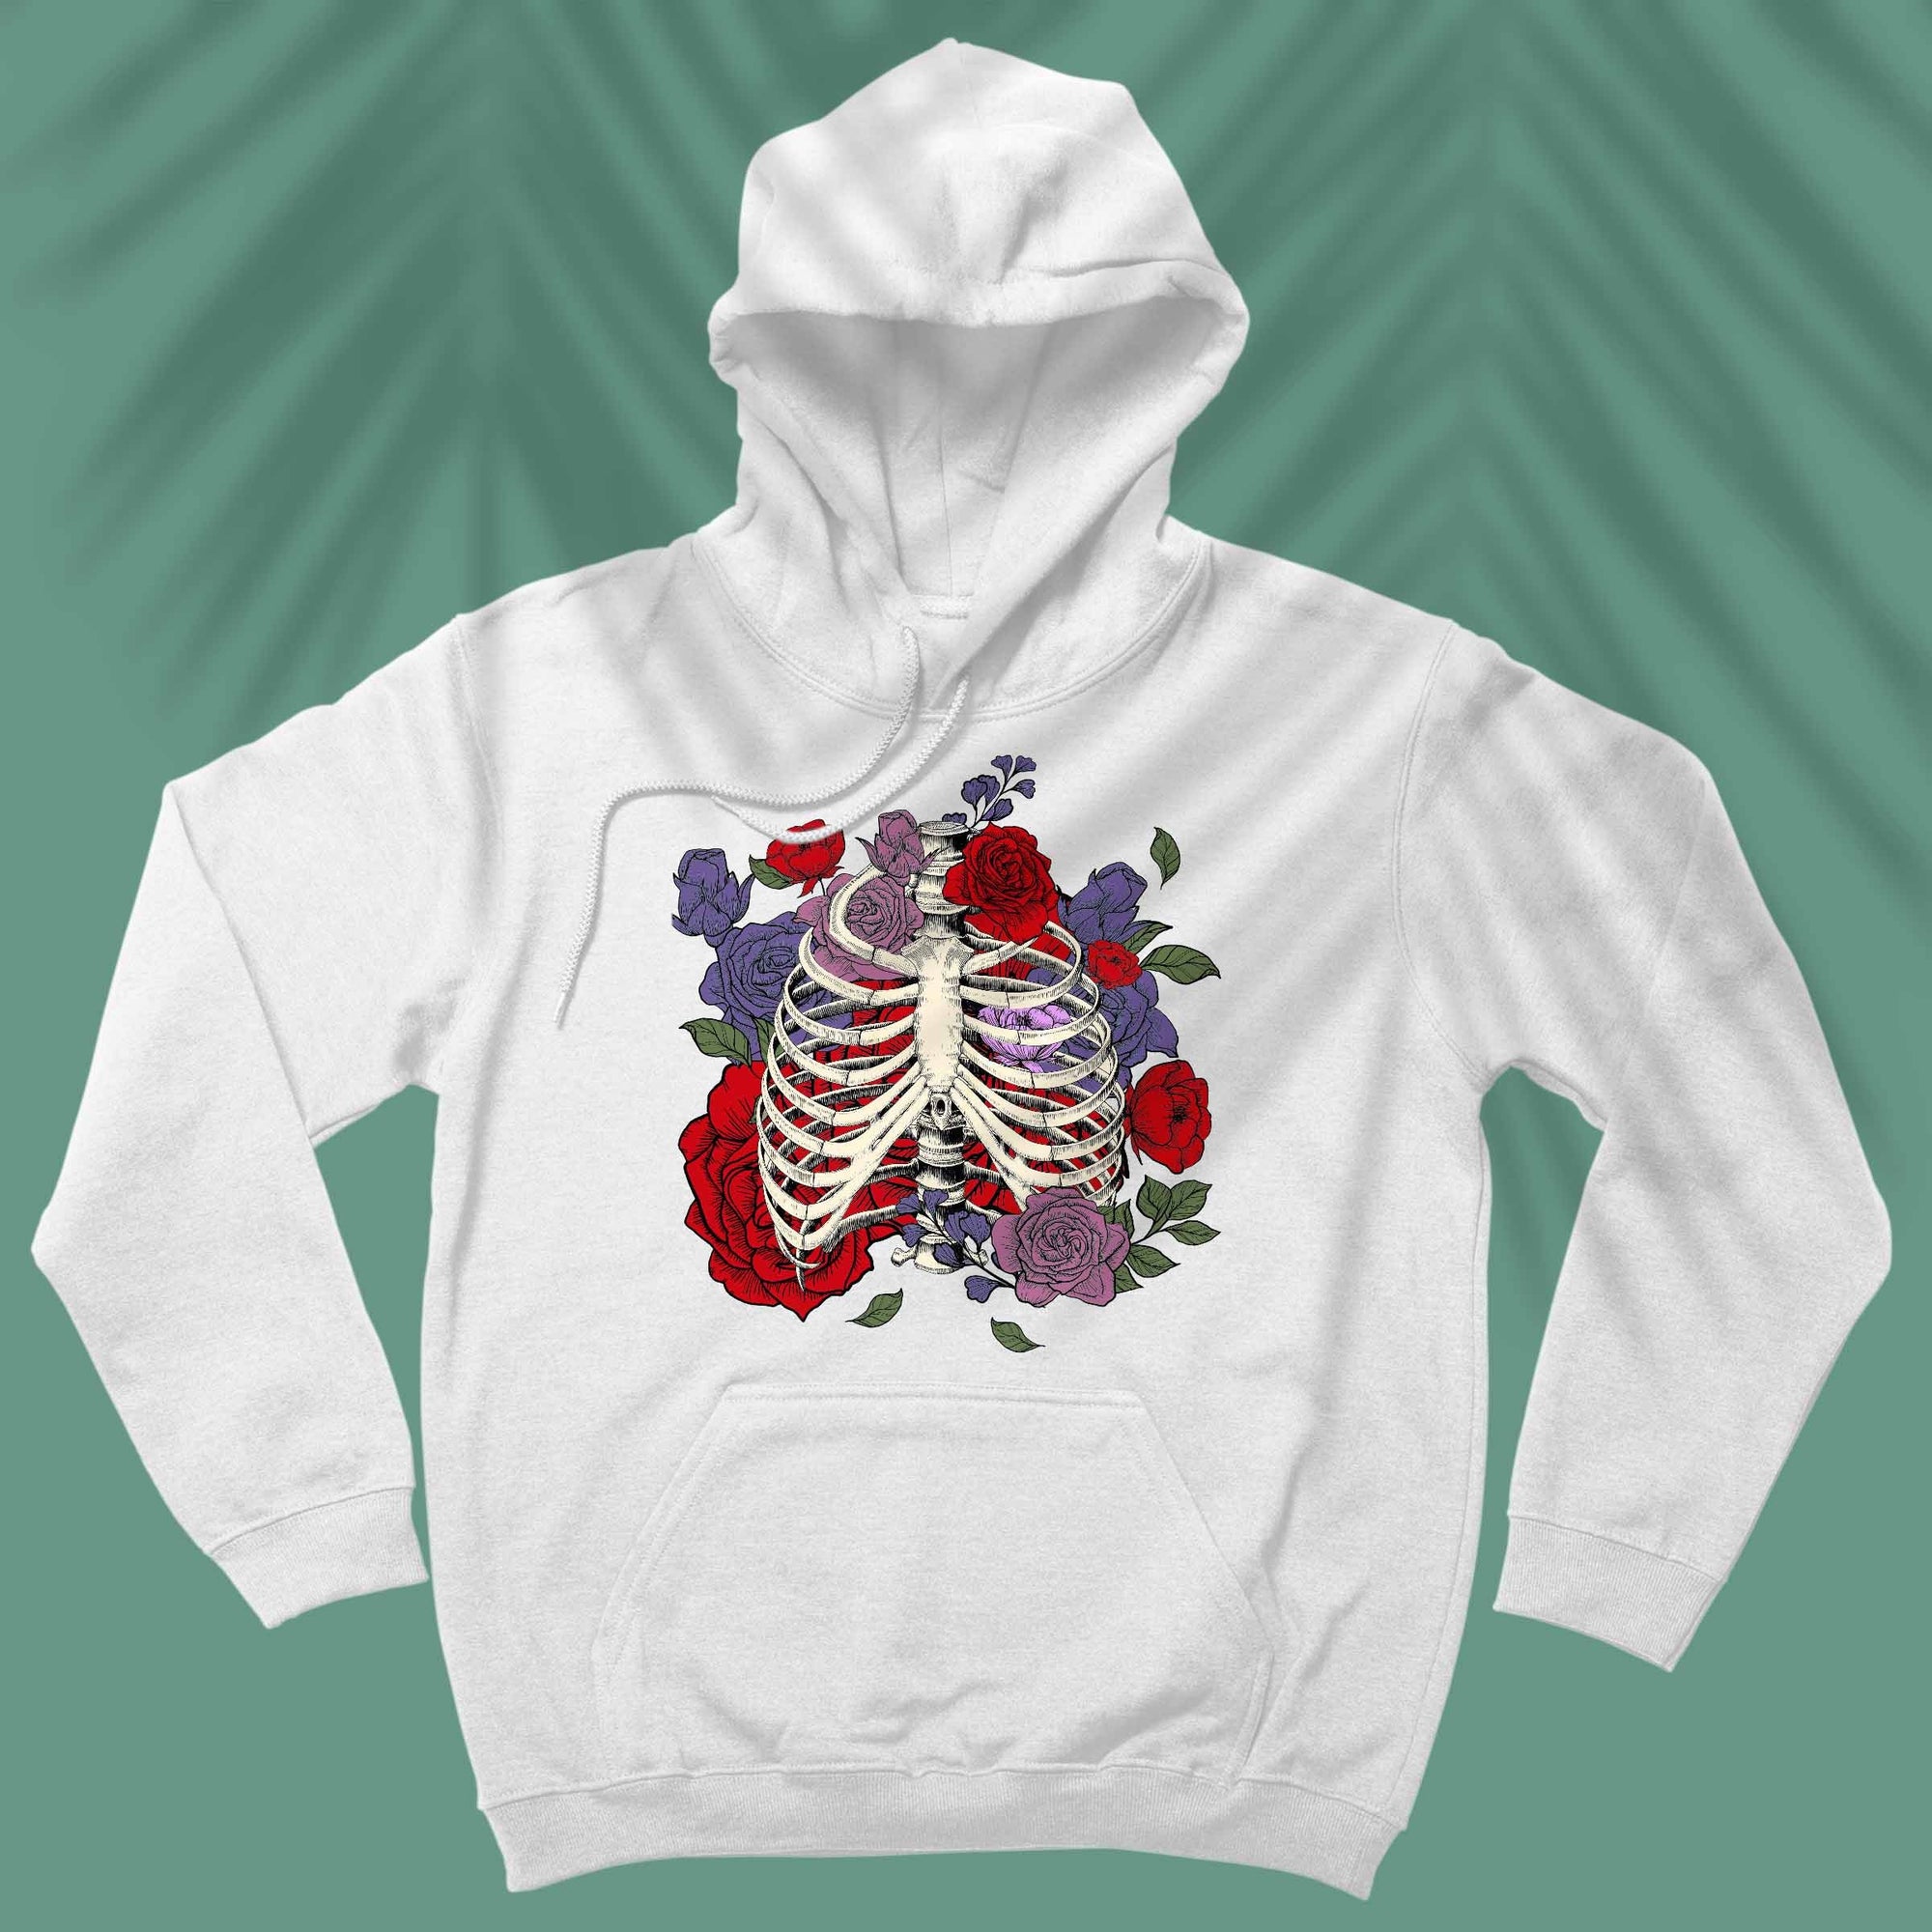 Bloom Where You Are Planted - Unisex Hoodie For Orthopedic Doctors &amp; Anatomists